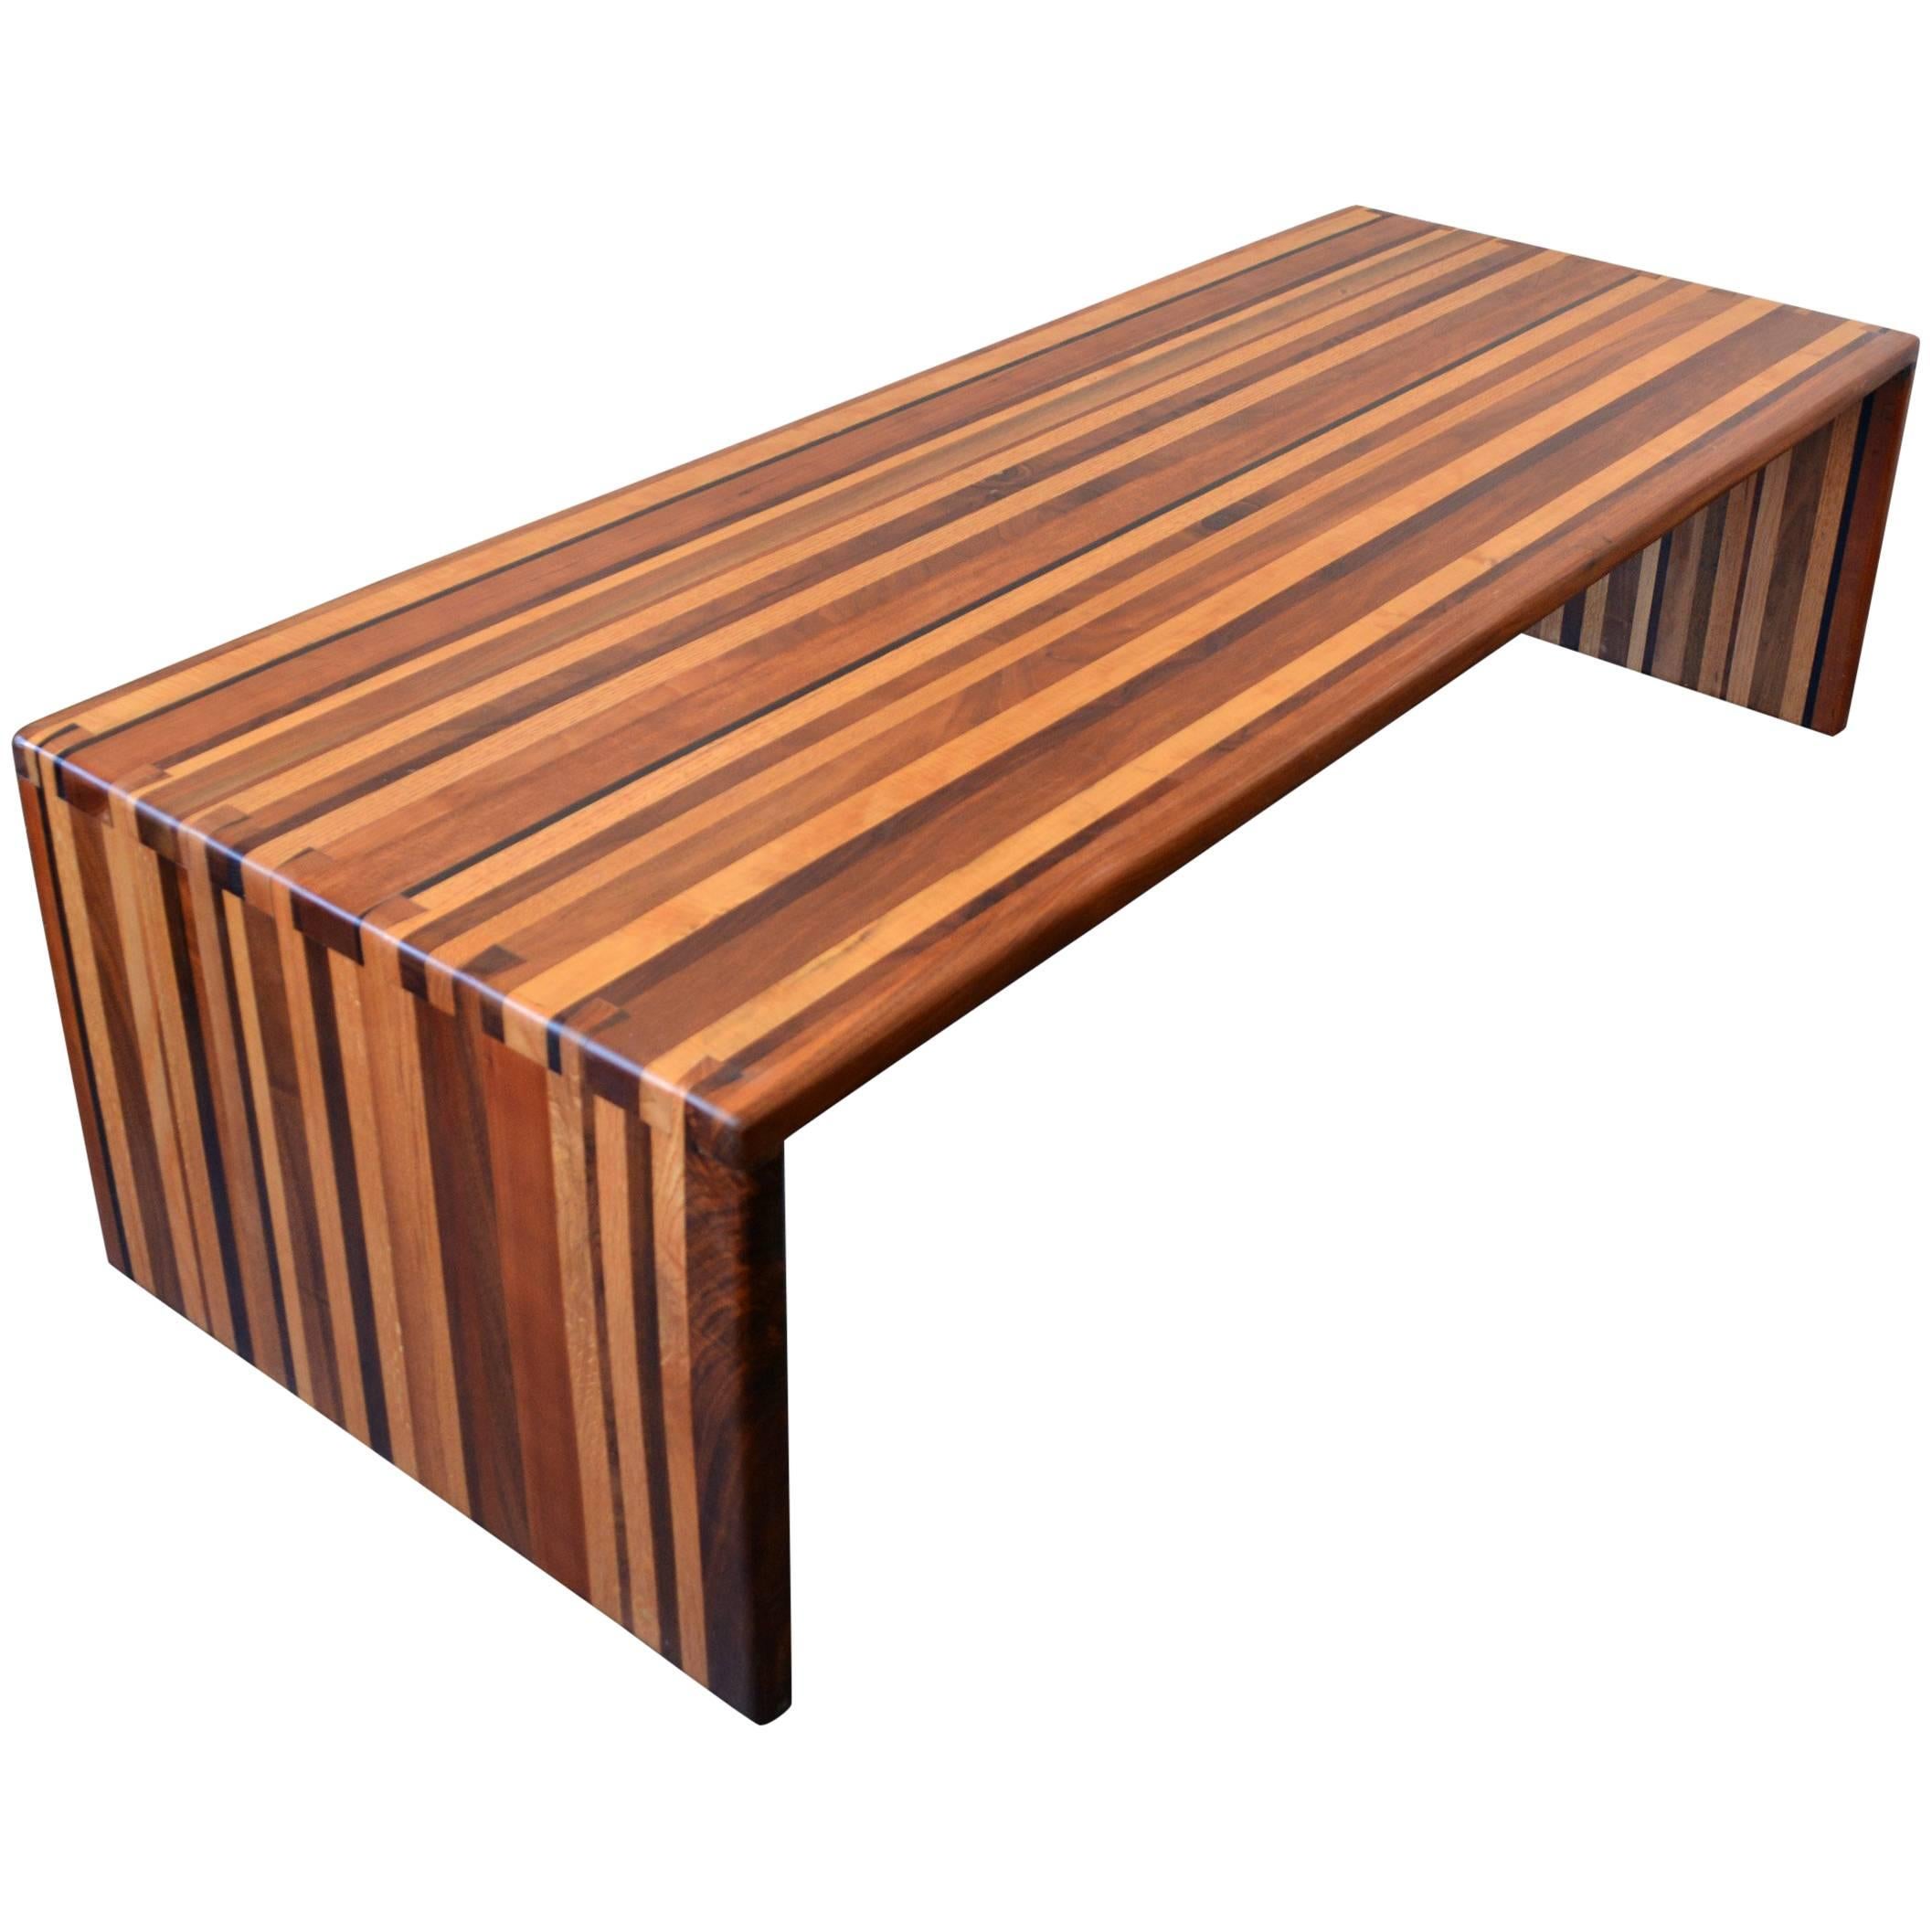 California Craft Studio Laminated Mixed Woods Coffee Table or Bench For Sale